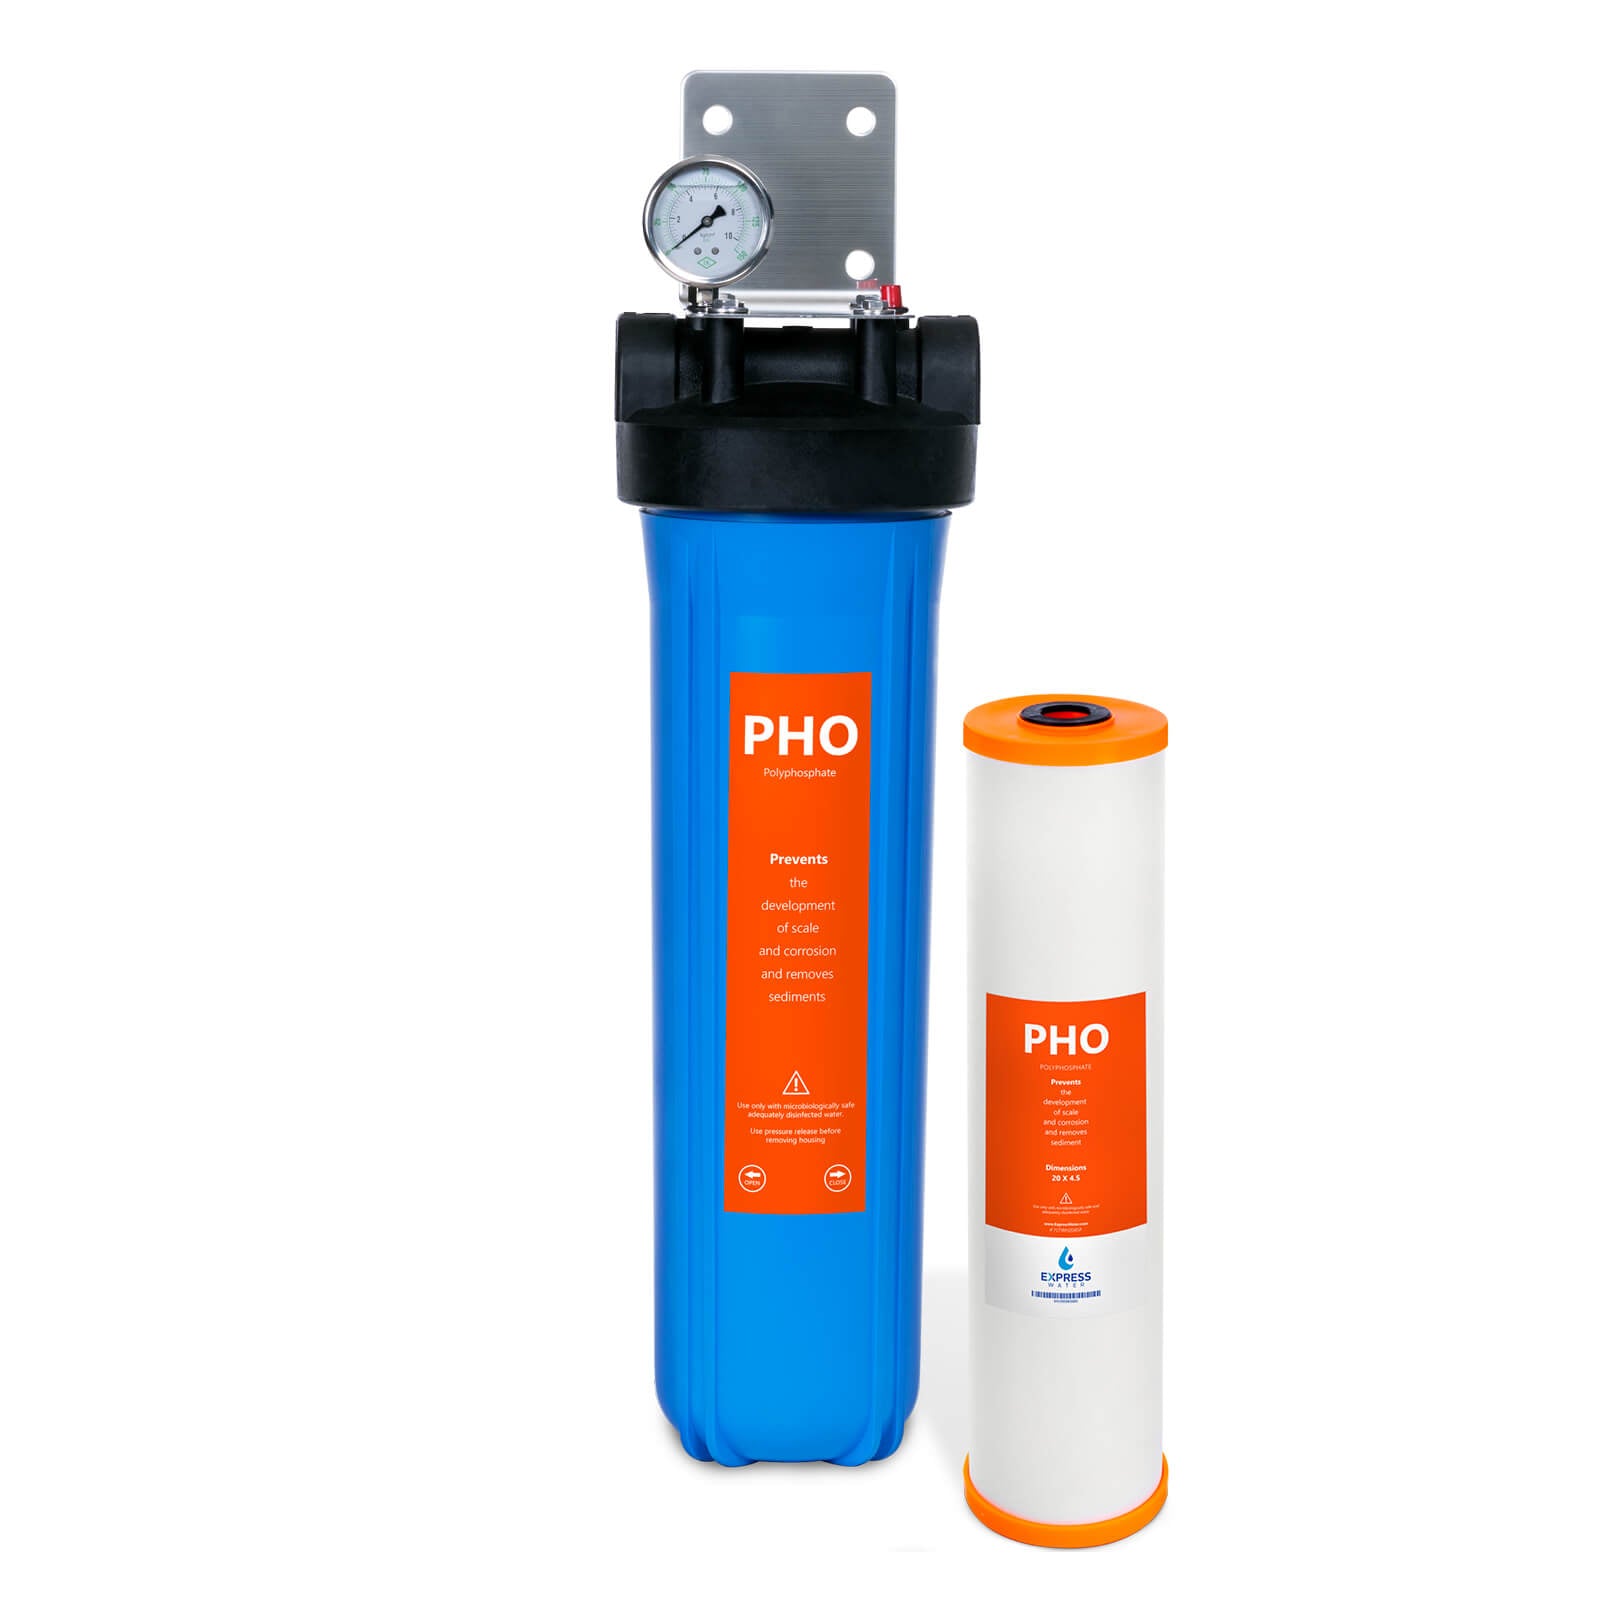 The Clean Water Filter Kit is a single step inline water filter